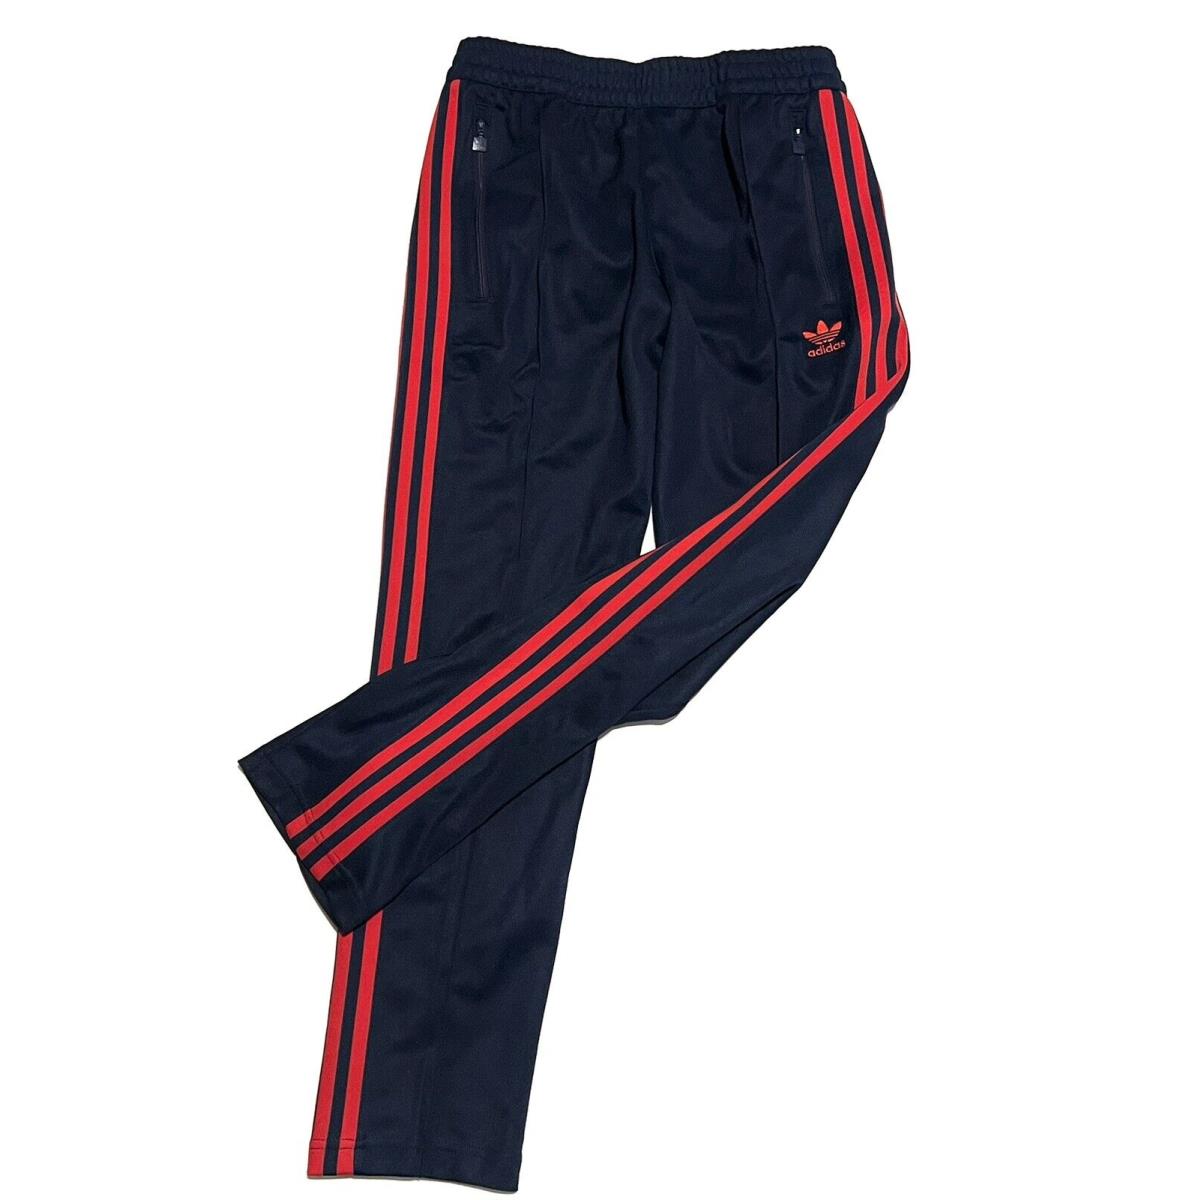 Adidas HS8943 Beckenbauer Track Pants Men s Size S Navy Blue Red Slim Tapered